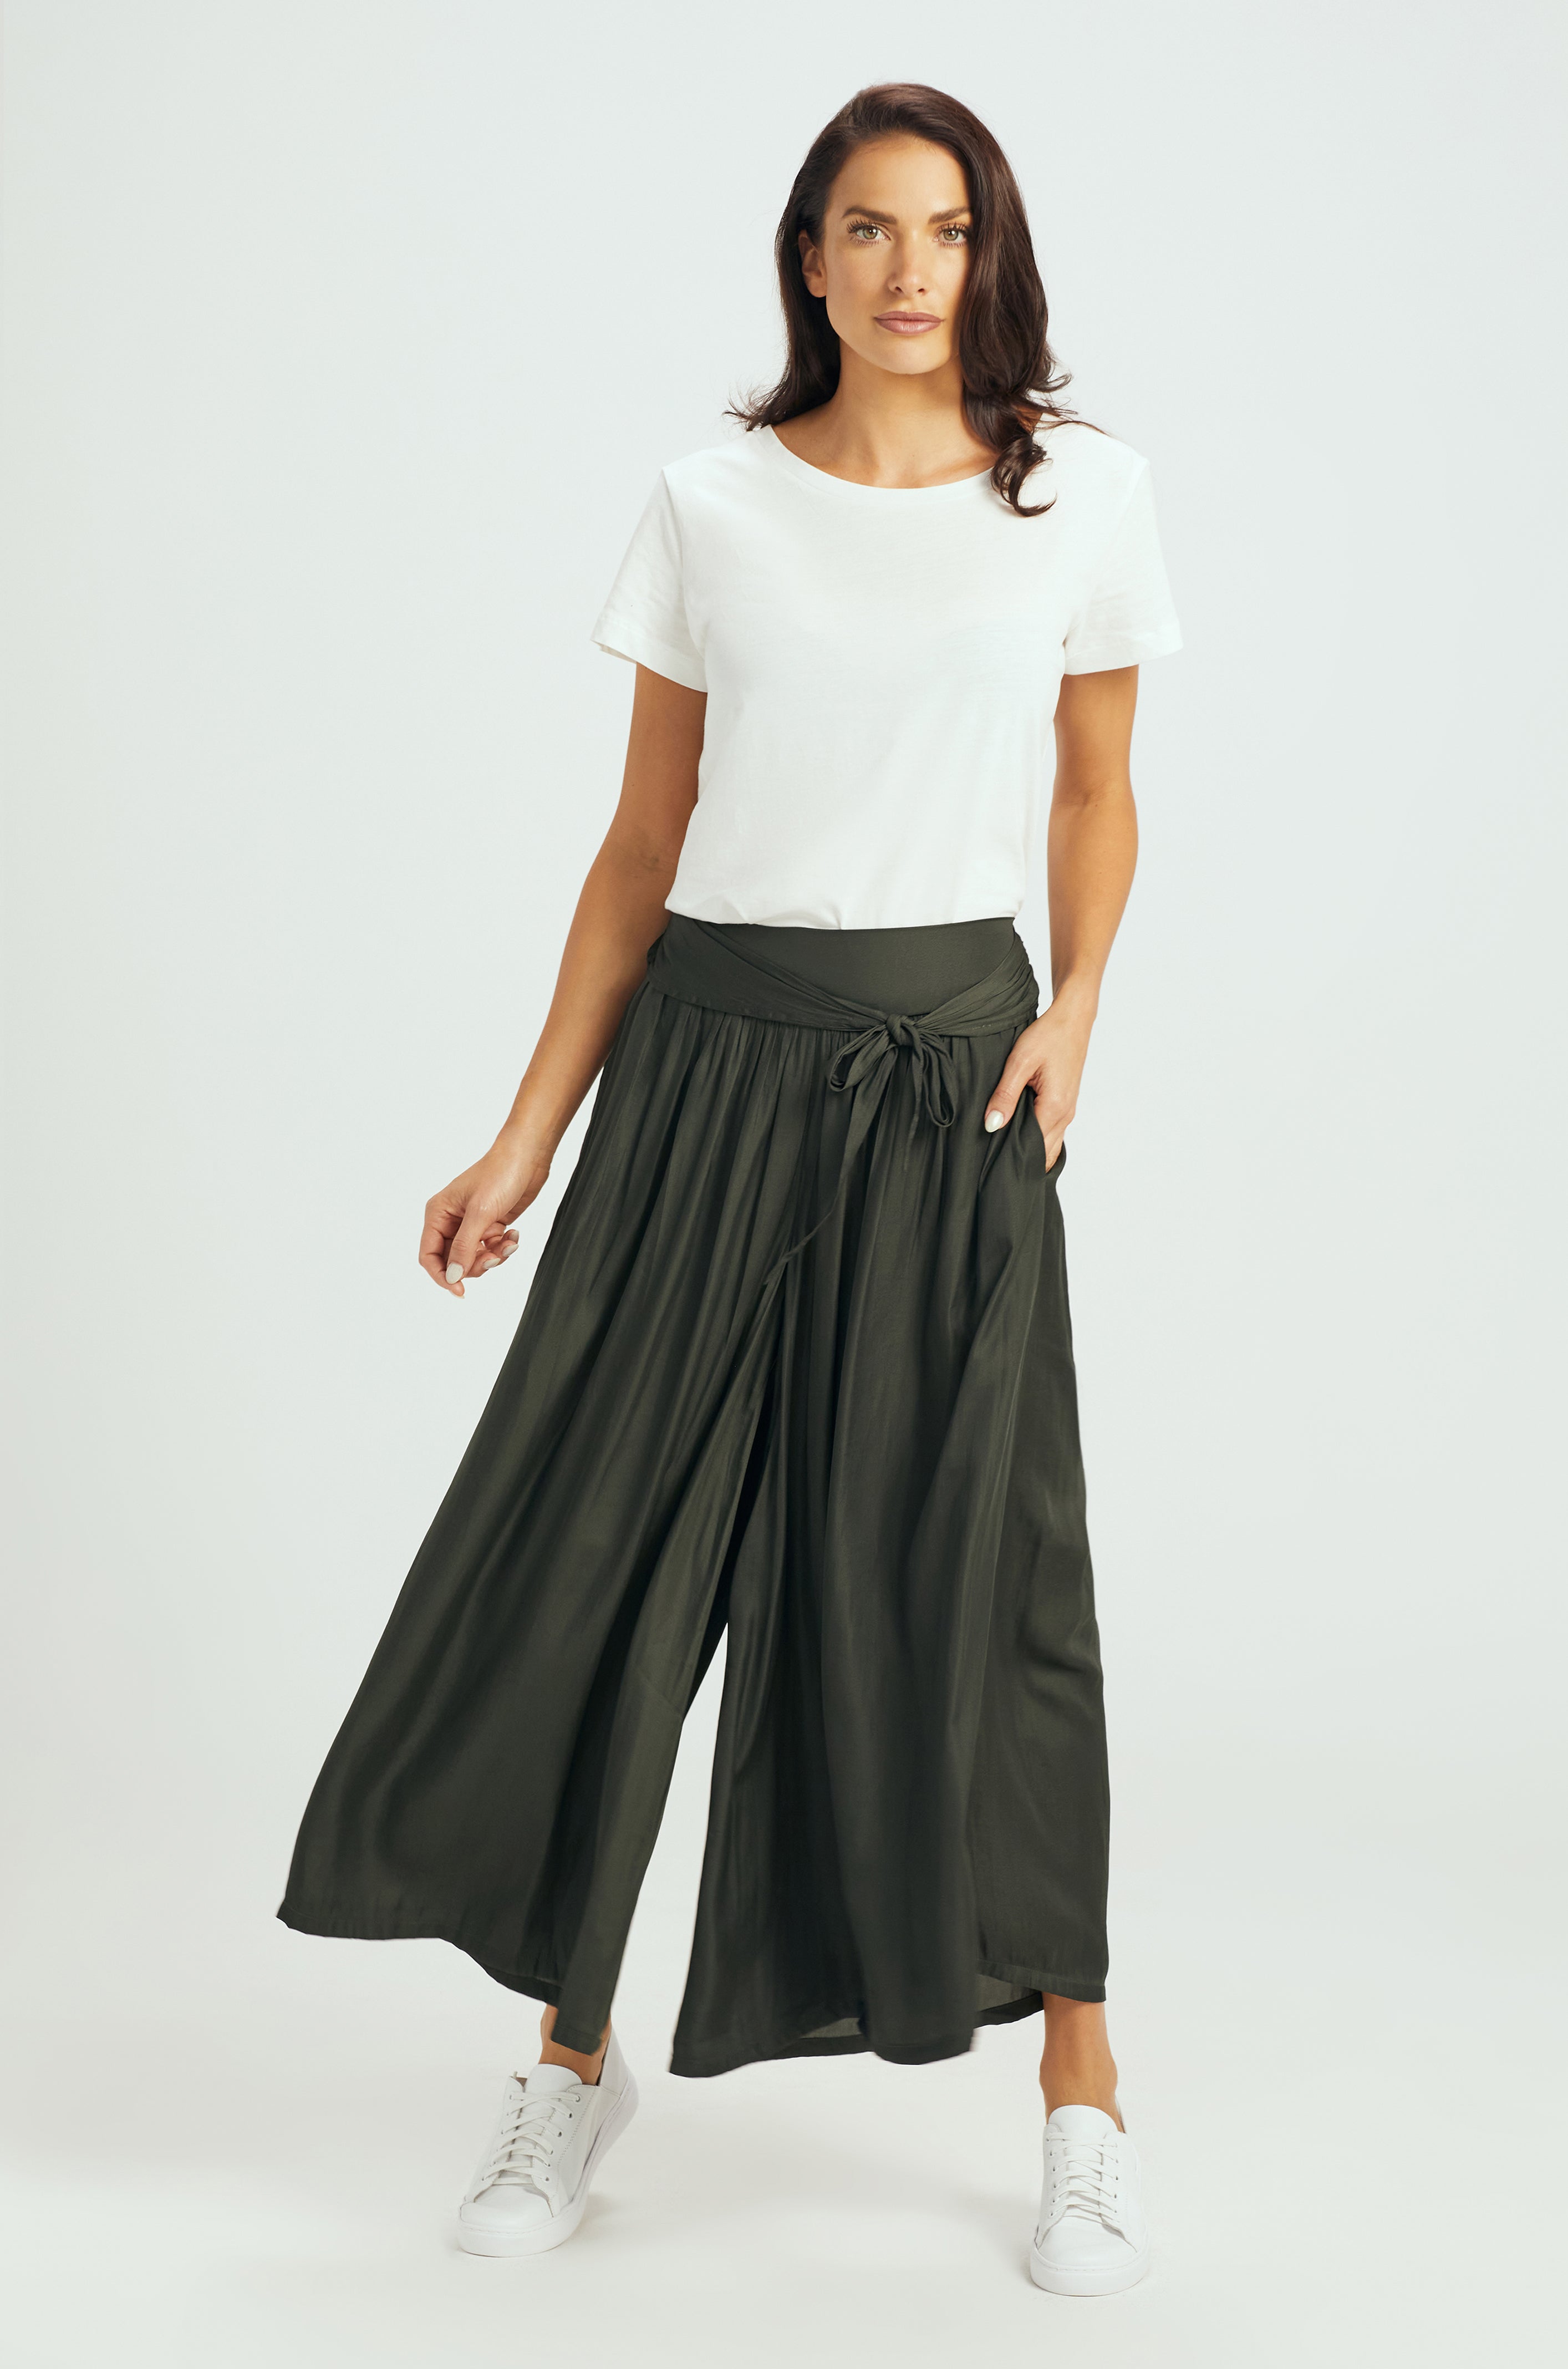 SKIRT PANTS / SAGE GREEN / ( SIZE SMALL , LARGE , 4XL , 5XL ARE  PRE ORDERS ONLY ) available mid MAY 24